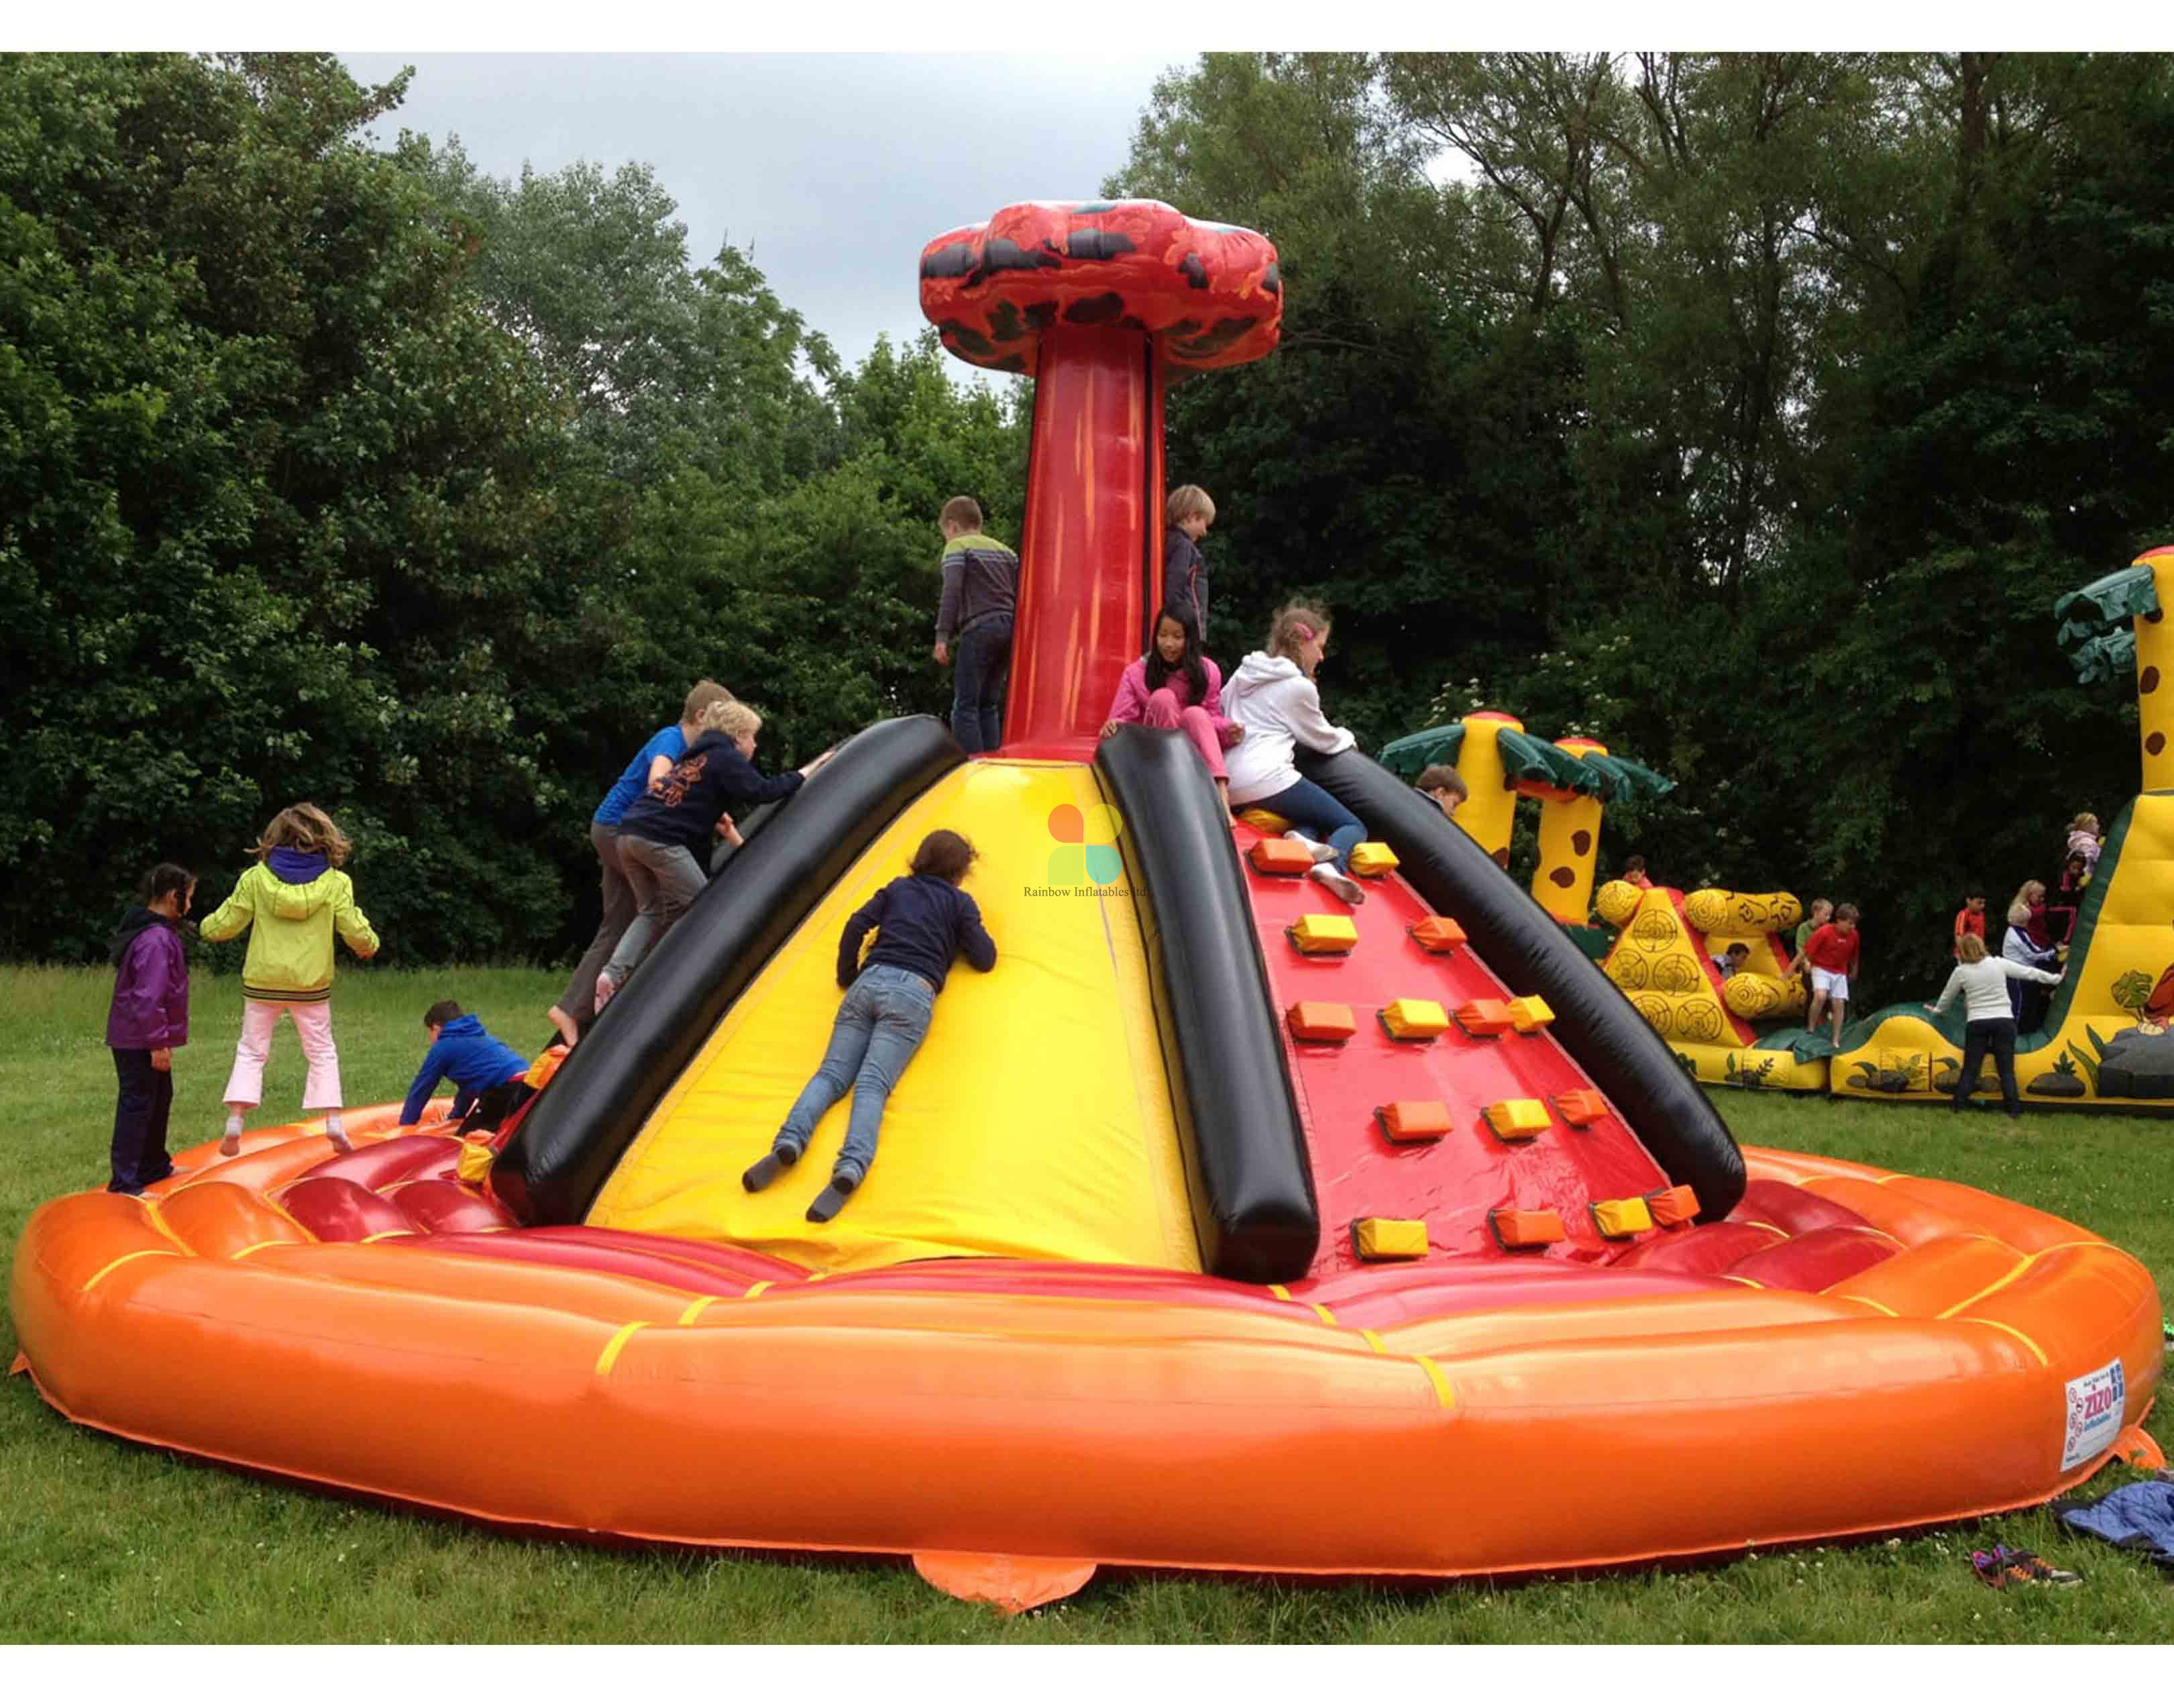 New Inflatable Volcano Slide with Rock Wall Combo for Kids Playground